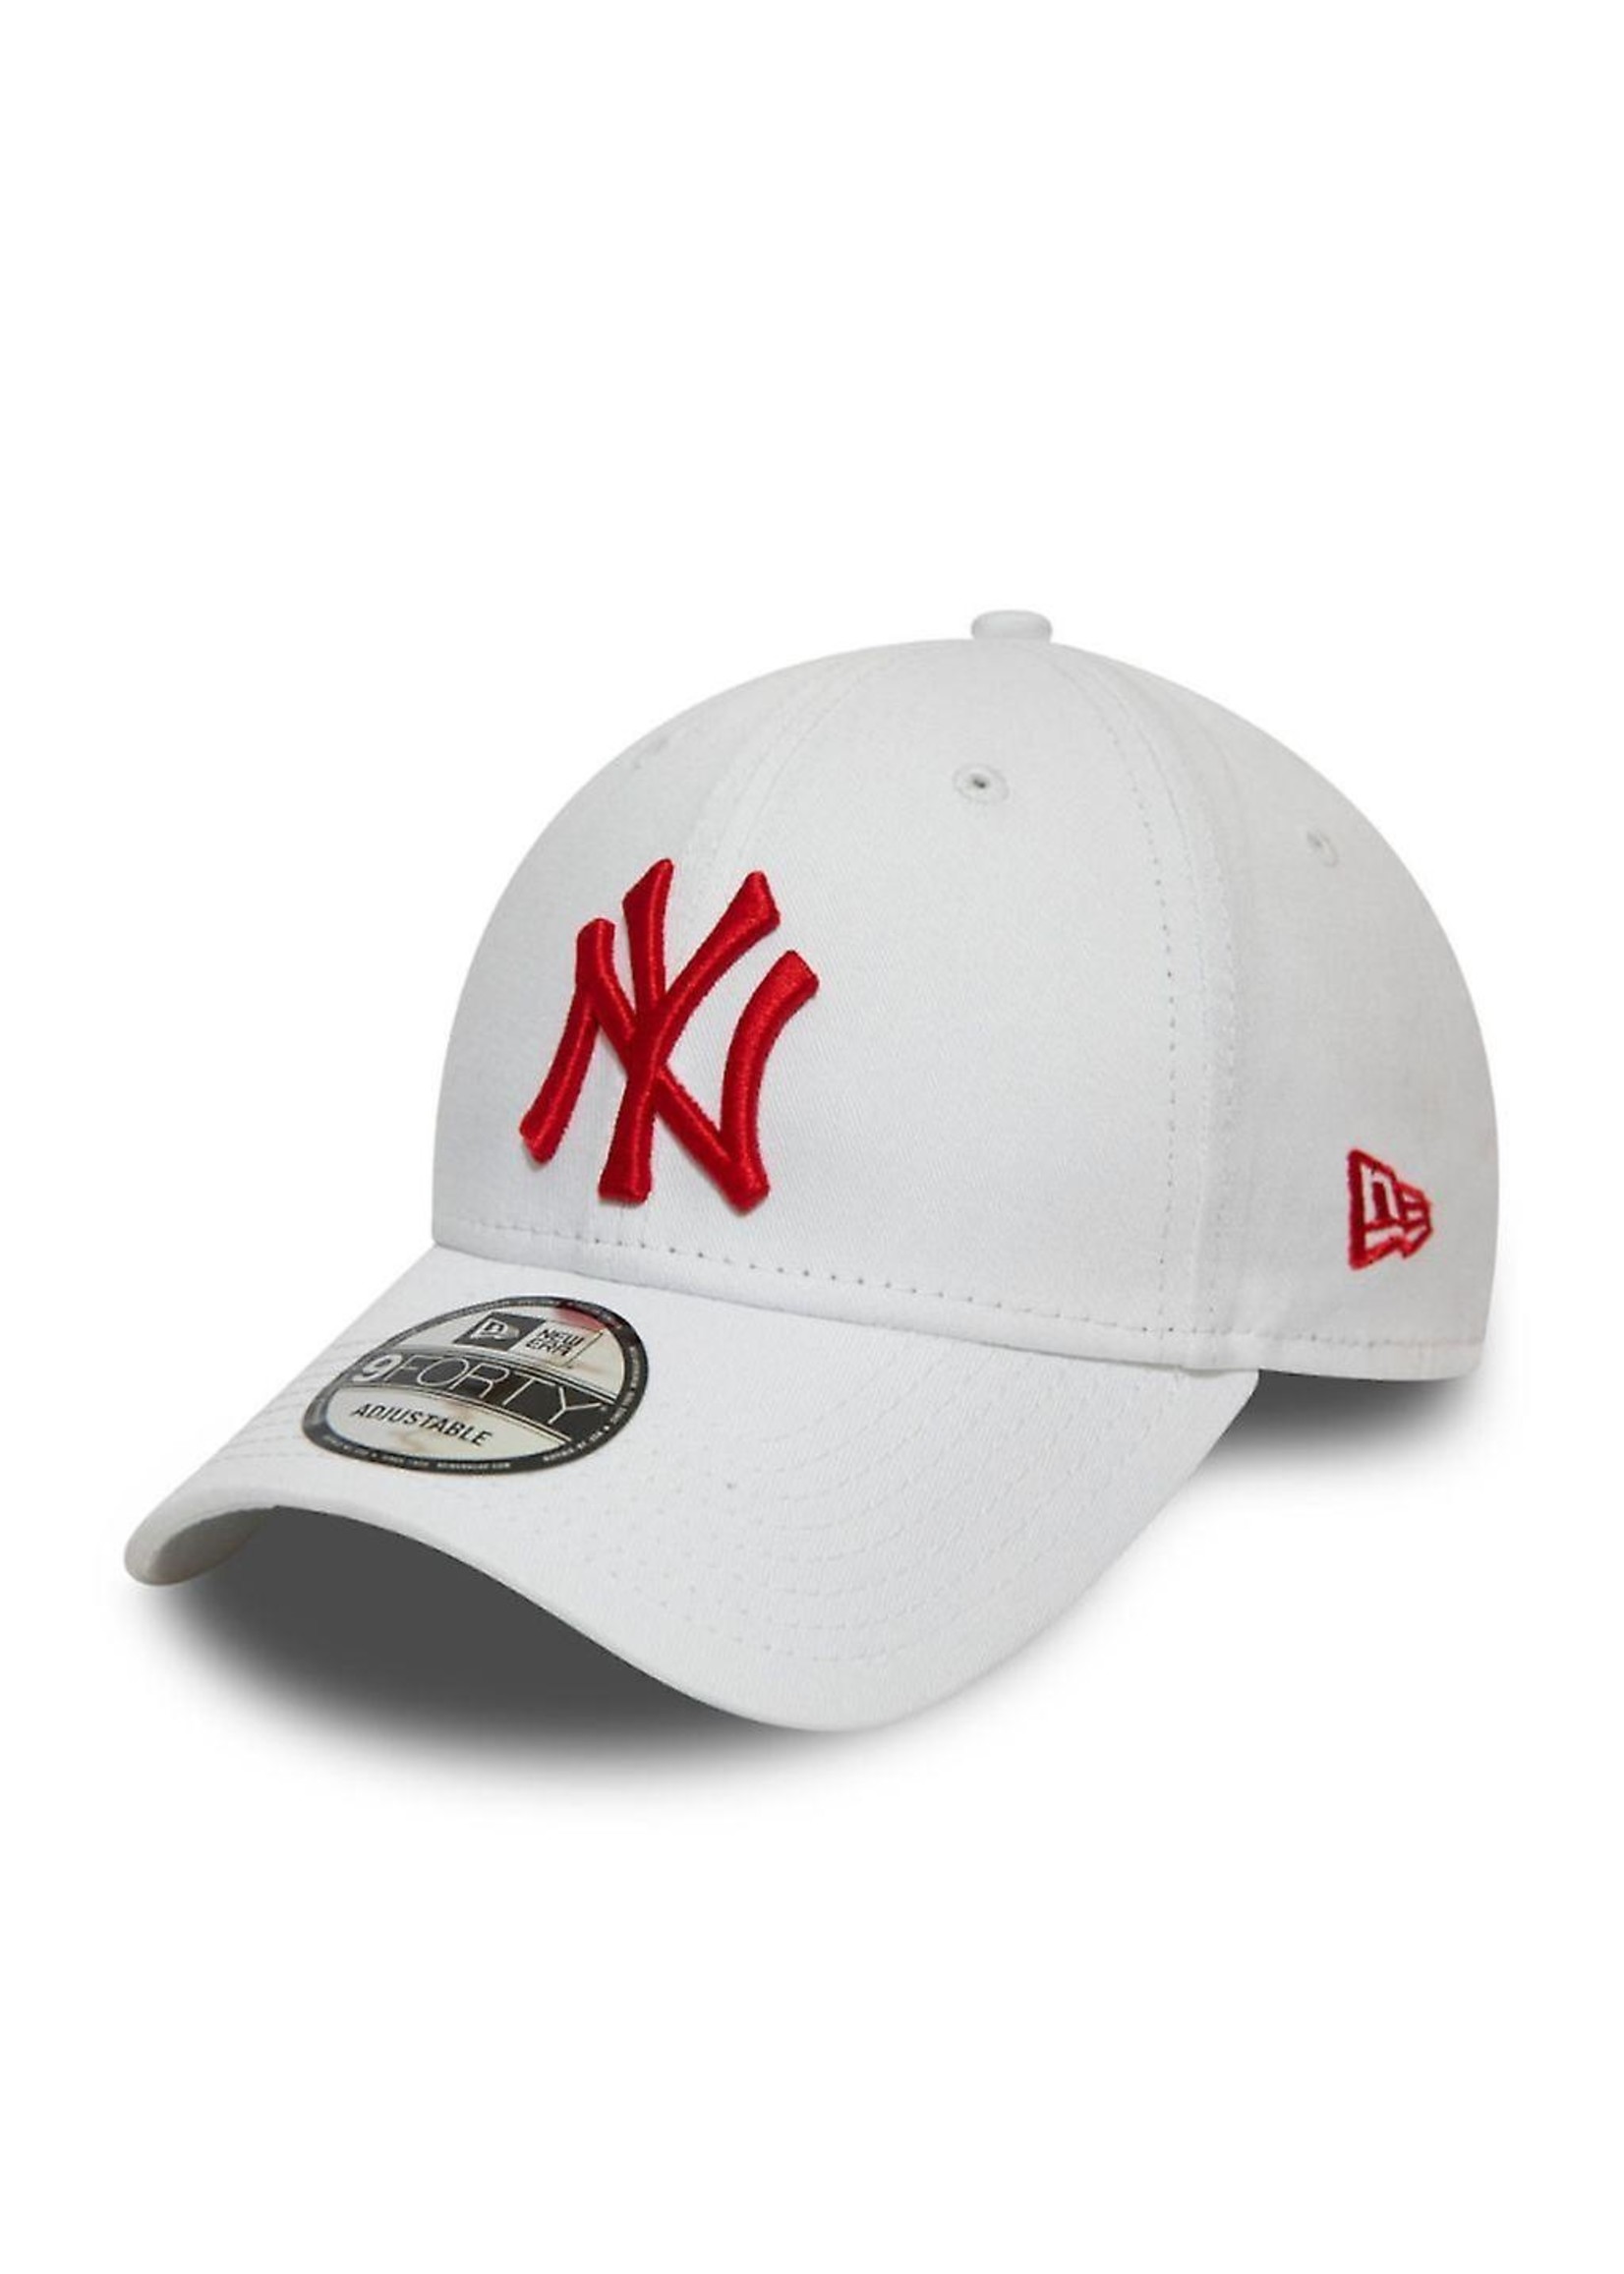 New Era NY 9Forty White/Red adjustable